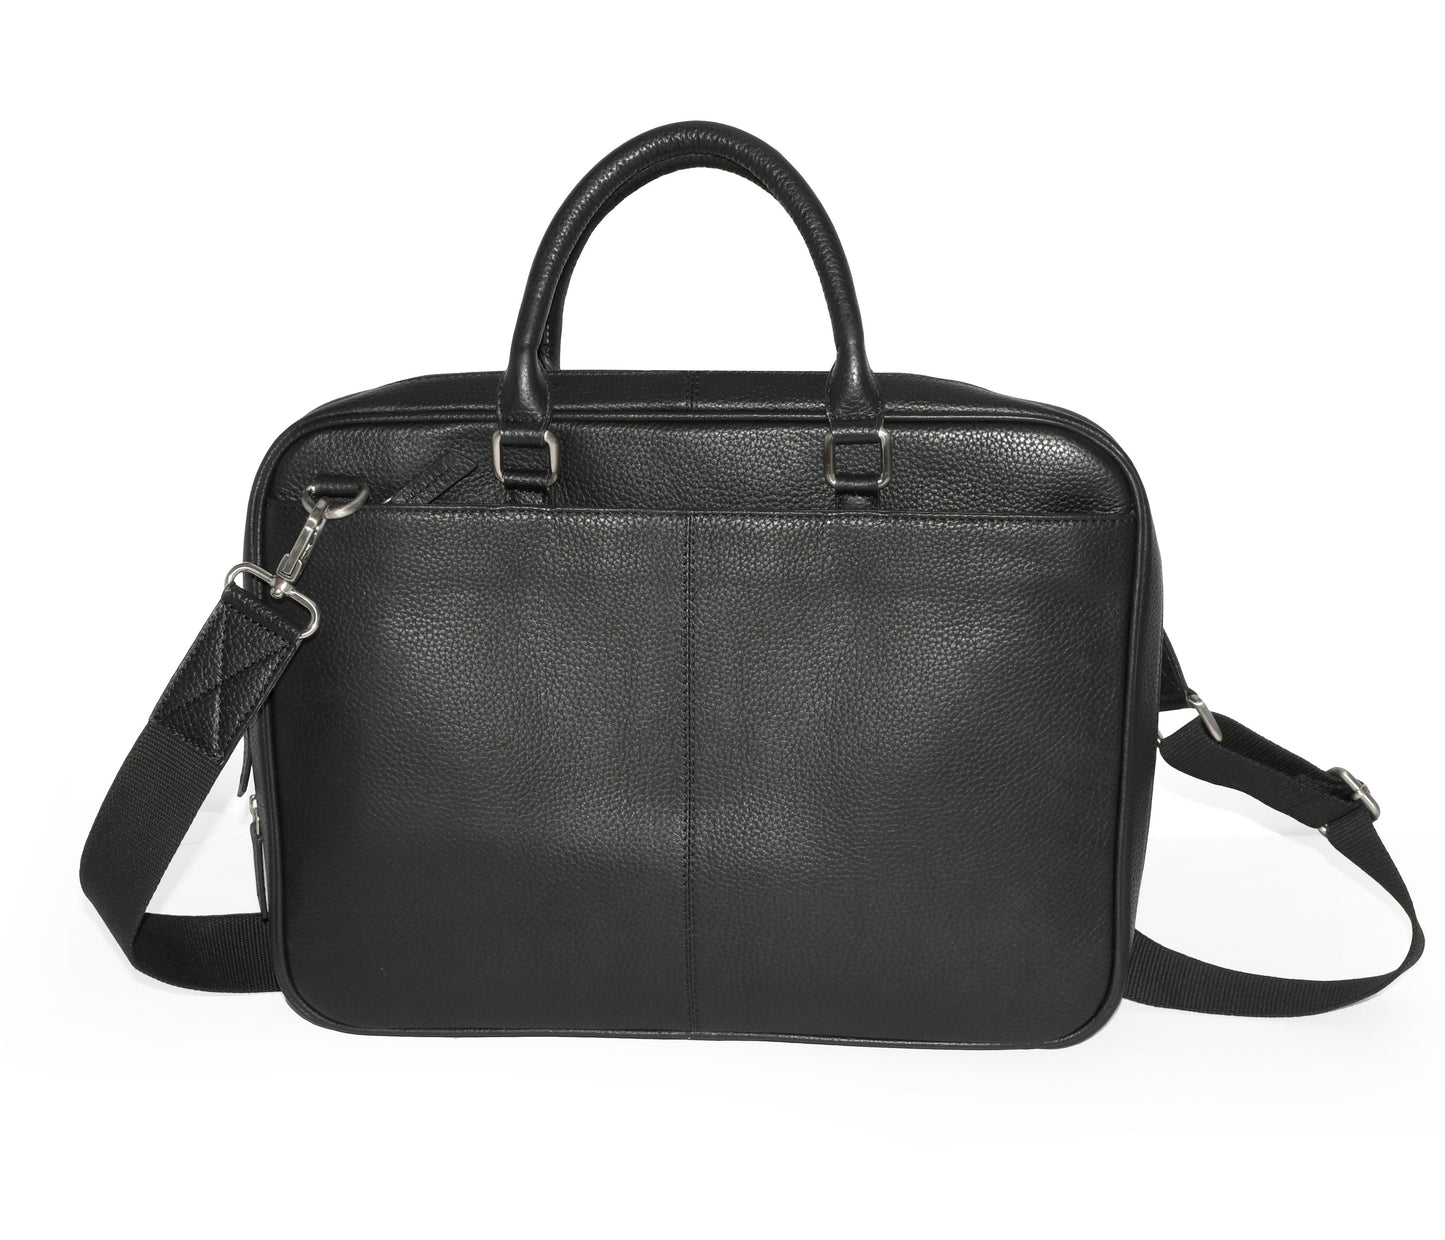 Slim Open Flap Briefcase with Top Handles